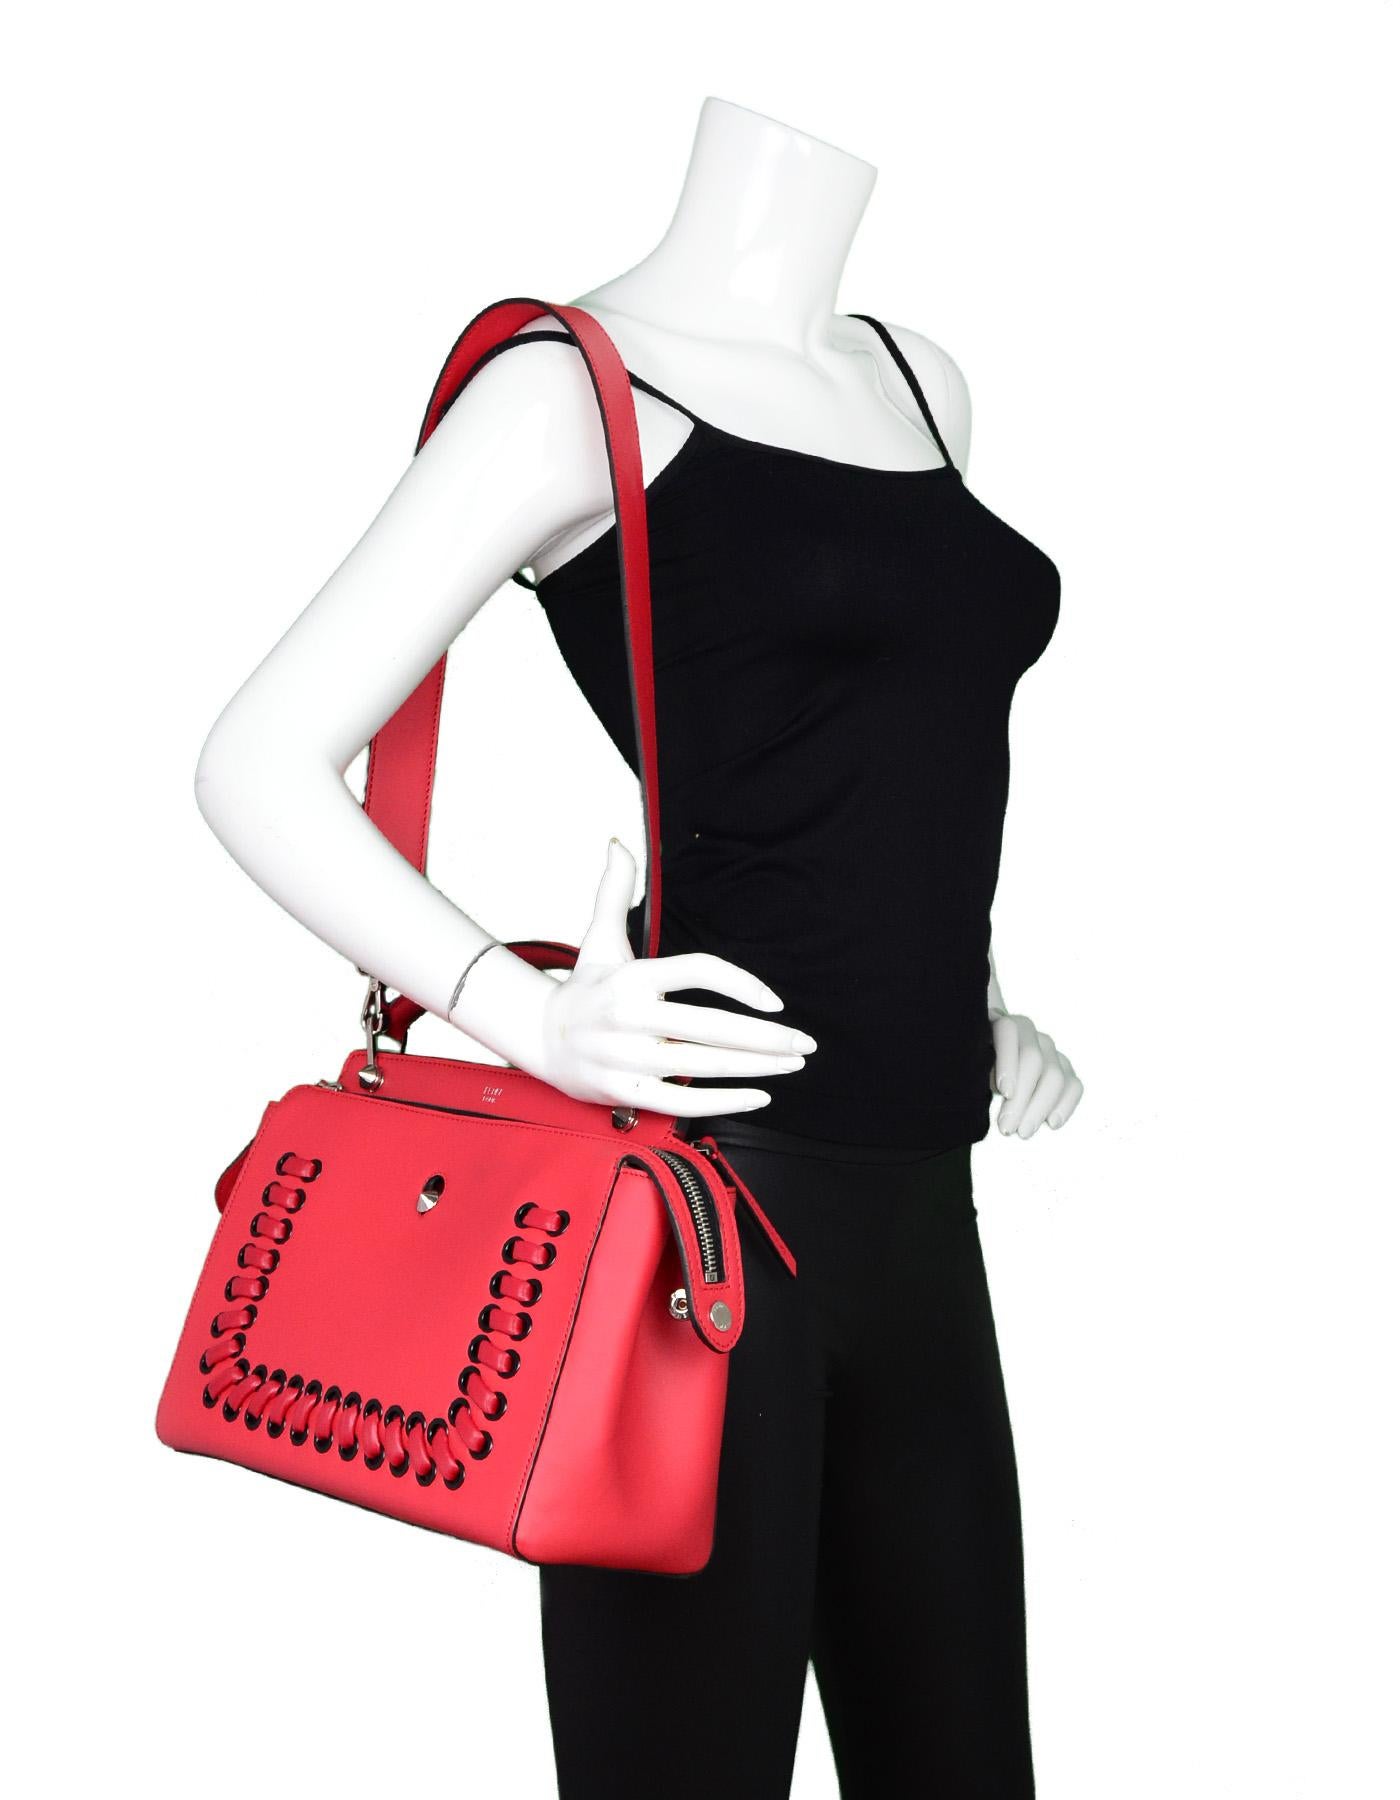 Fendi Red Nappa Leather Whipstitch Fashion Show Dotcom Satchel Bag w/ Strap

Made In: Italy 
Color: Red
Hardware: Silvertone
Materials: Nappa leather and metal 
Lining: Dark grey suede
Closure/Opening: Two zip compartments with snap ends
Exterior